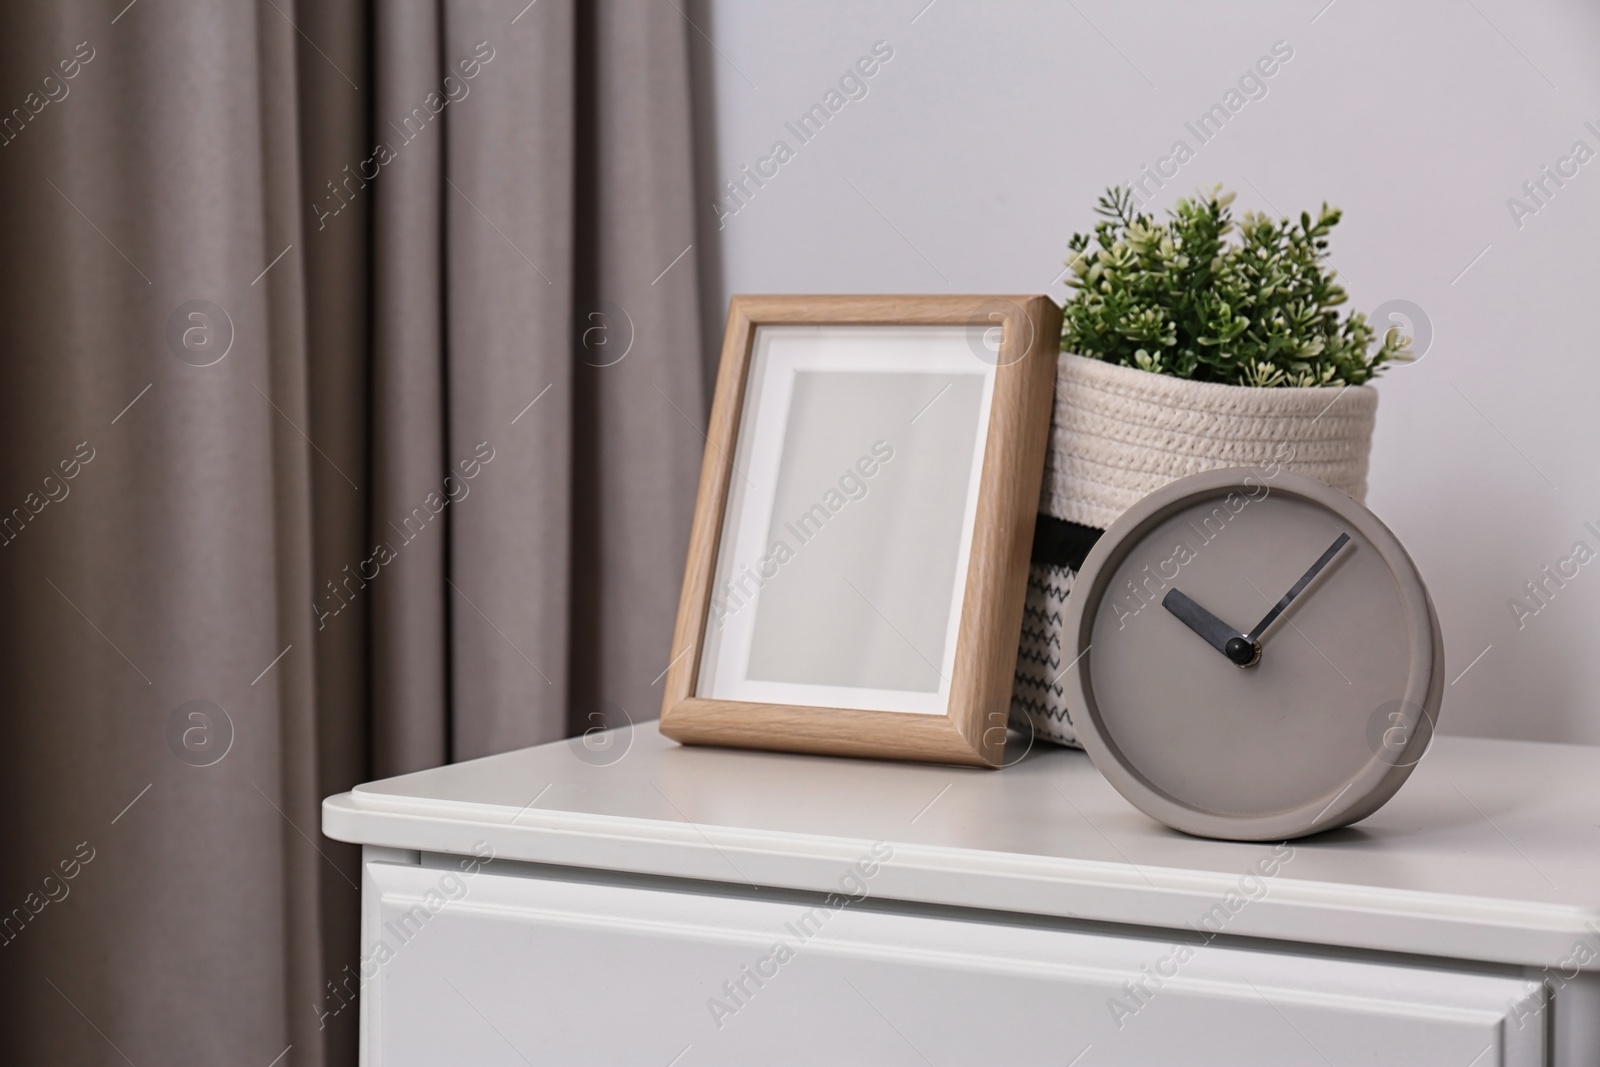 Photo of Stylish analog clock, photo frame and potted plant on chest of drawers in room. Space for text